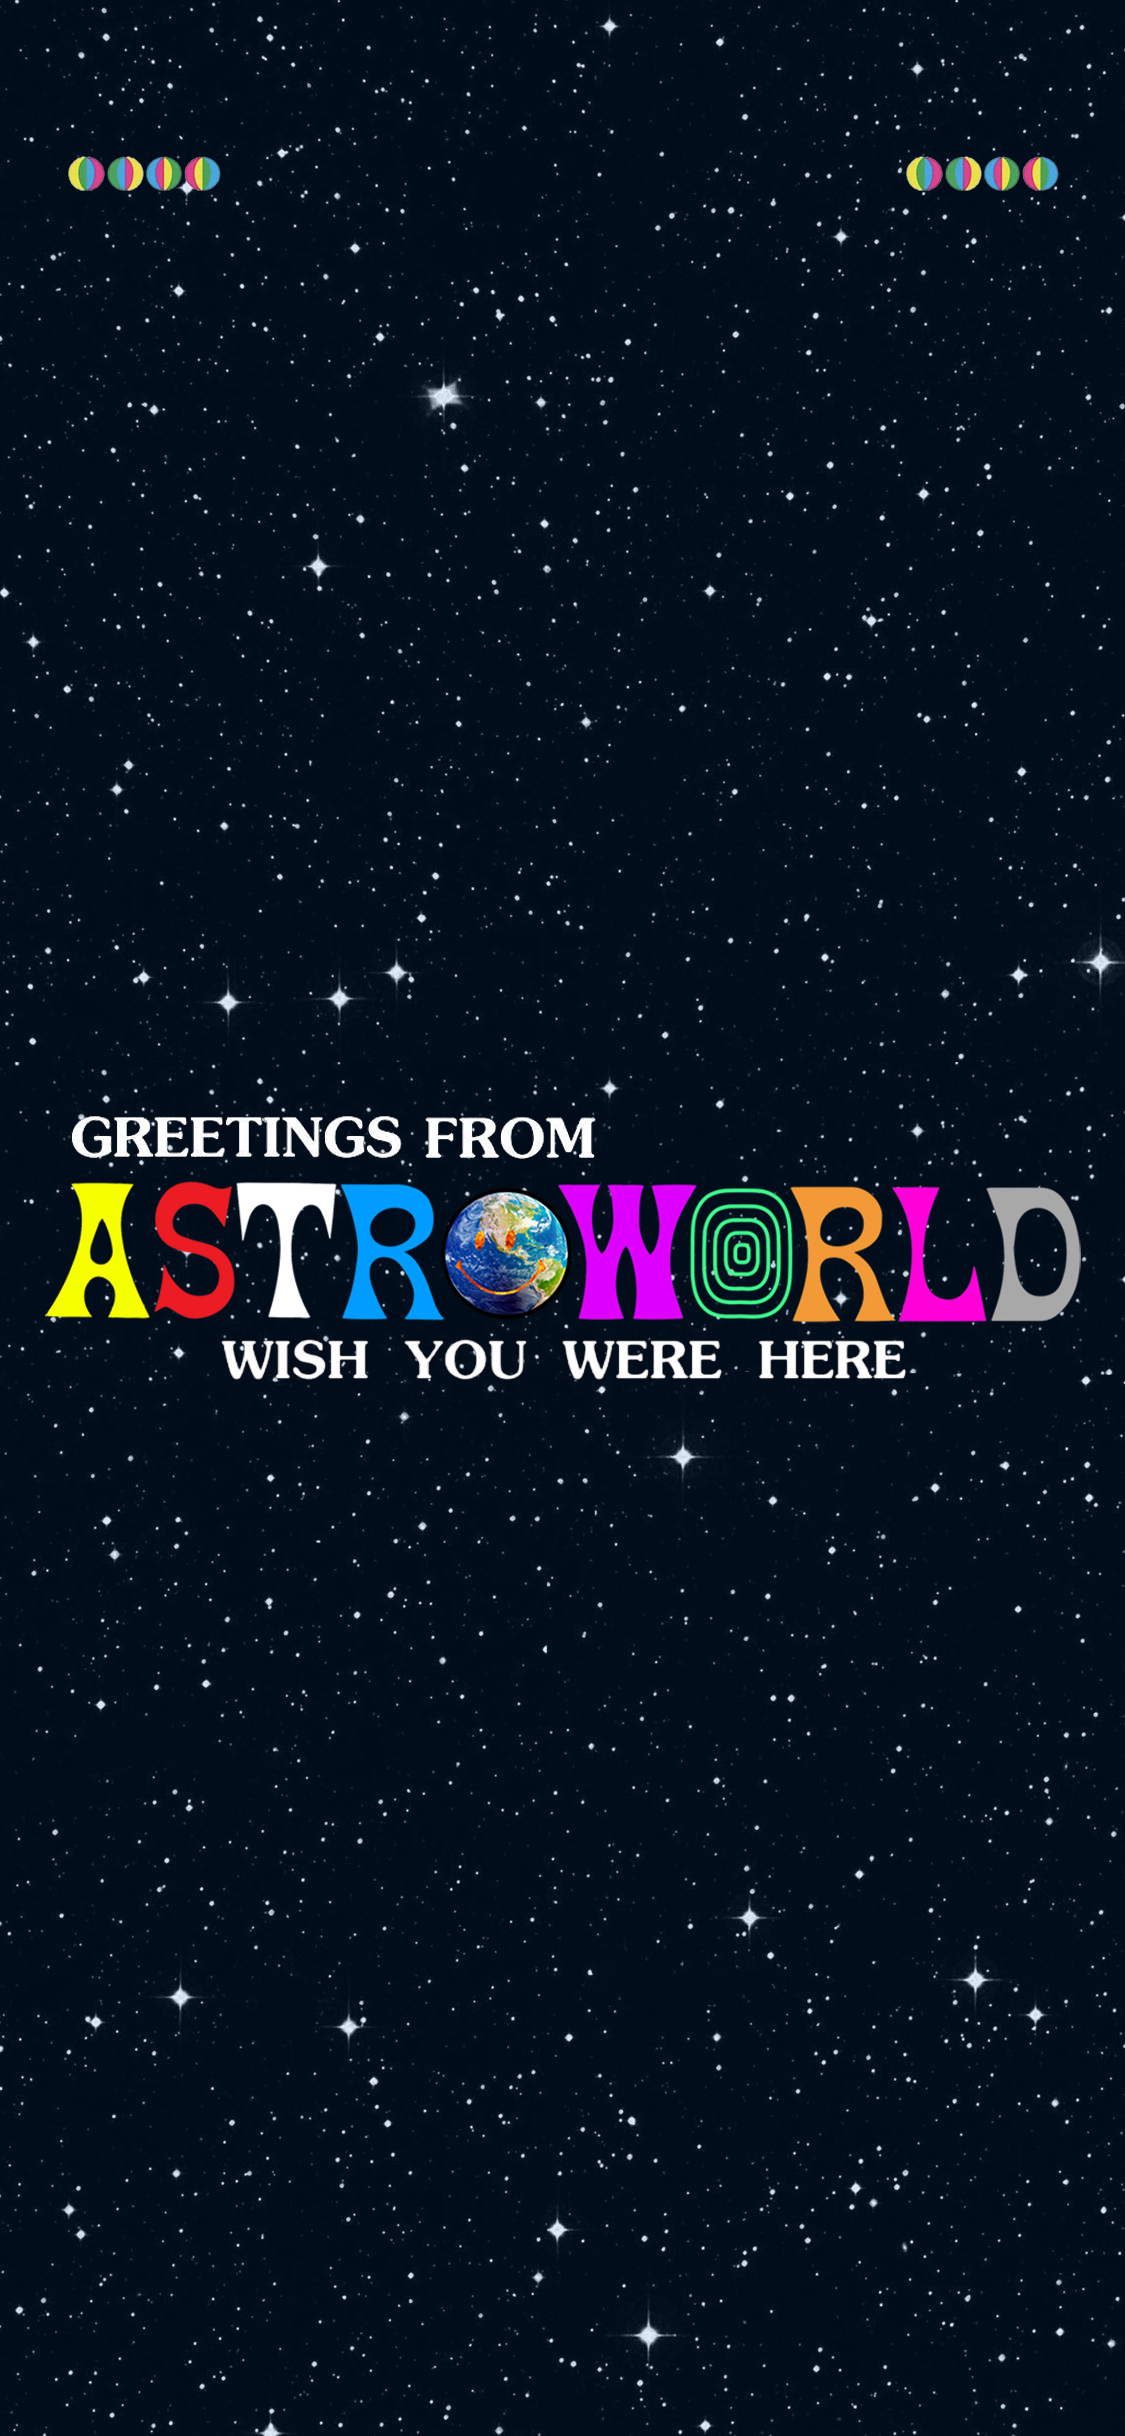 Astroworld Iphone Wallpapers